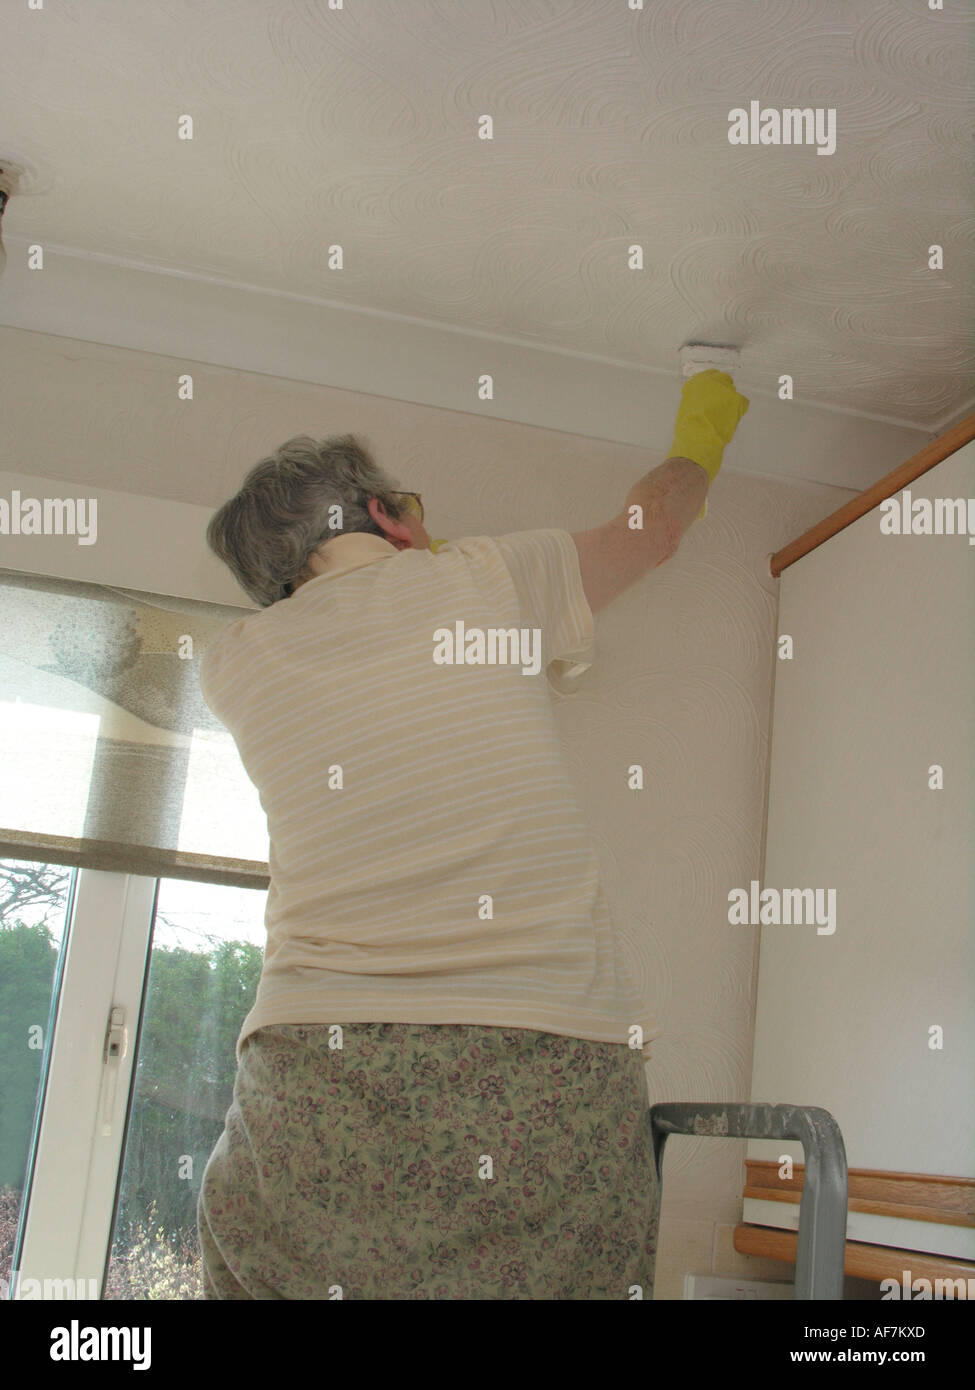 Elderly Woman Decorating And Painting The Ceiling With Paint Brush